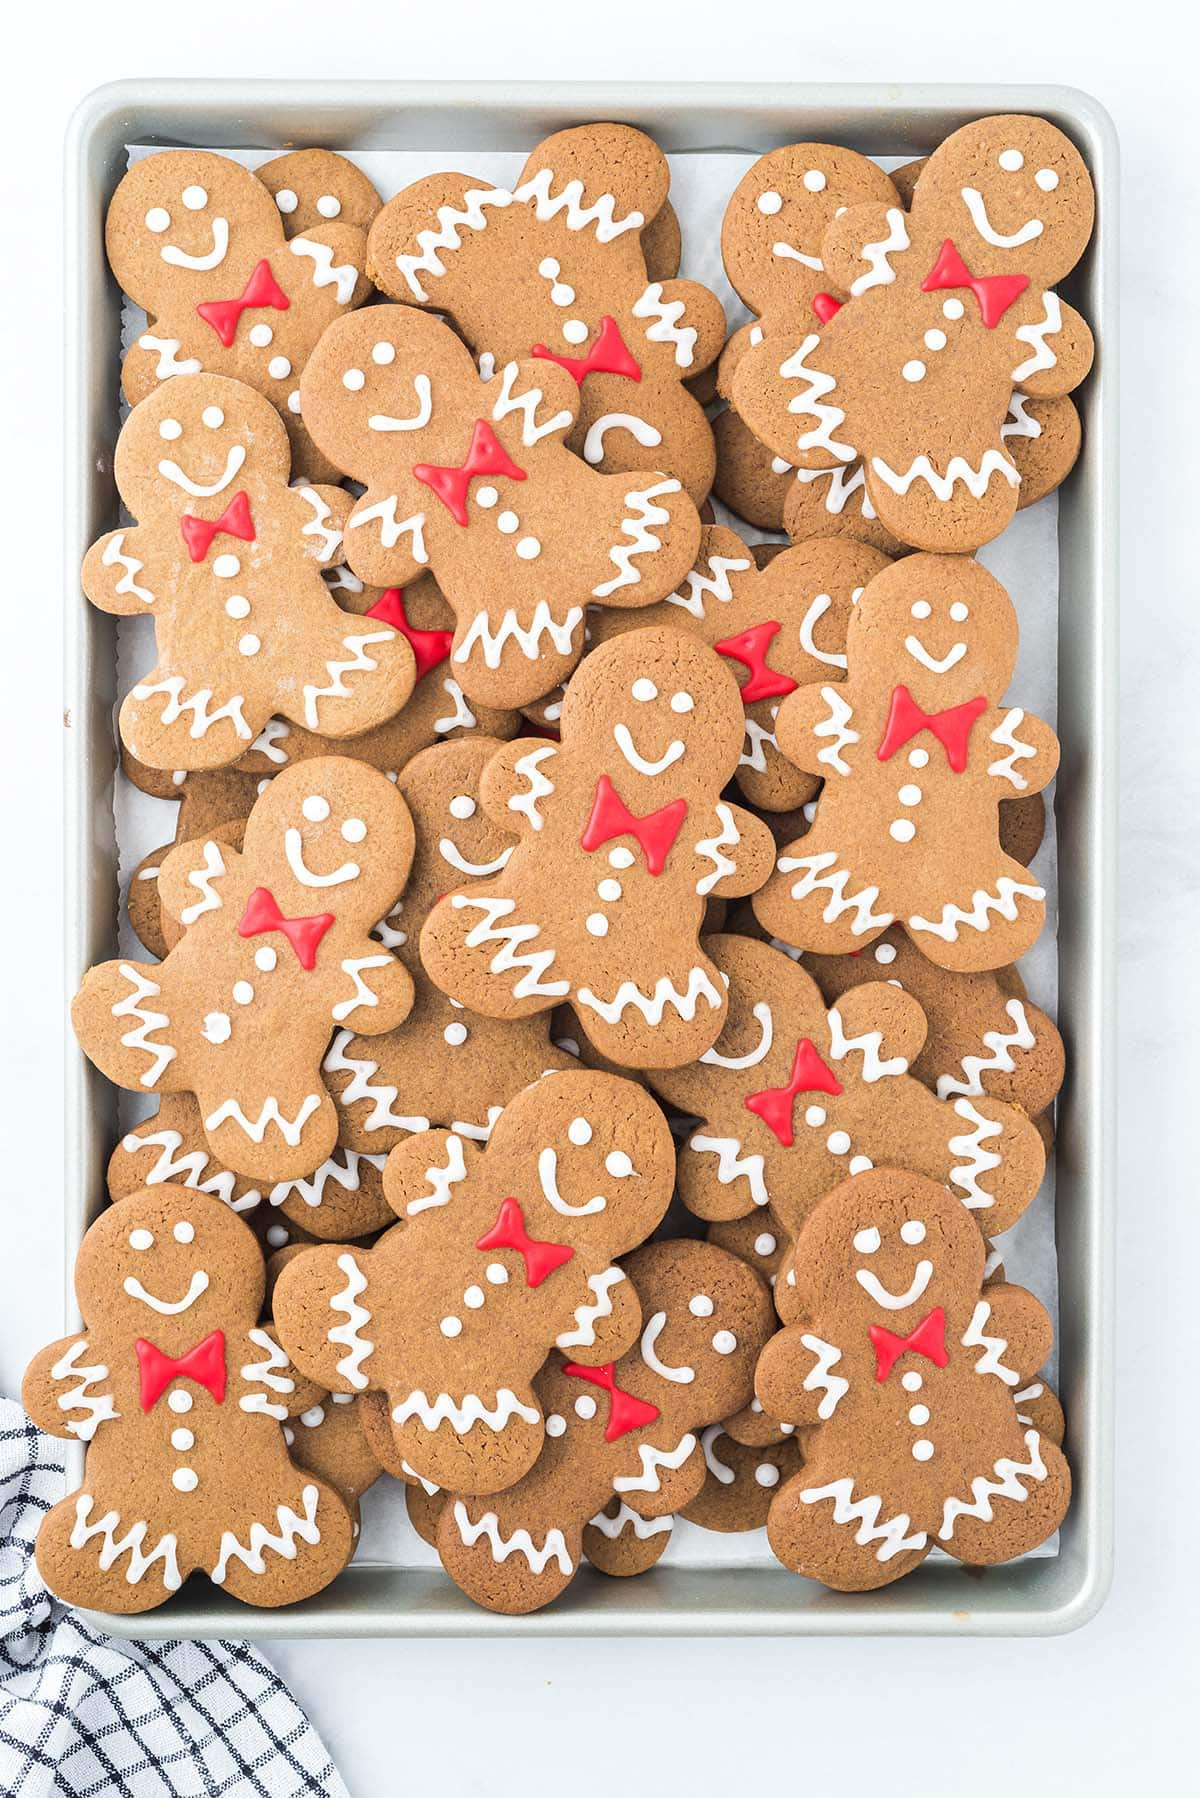 gingerbread men cookies stacked on top of baking tray